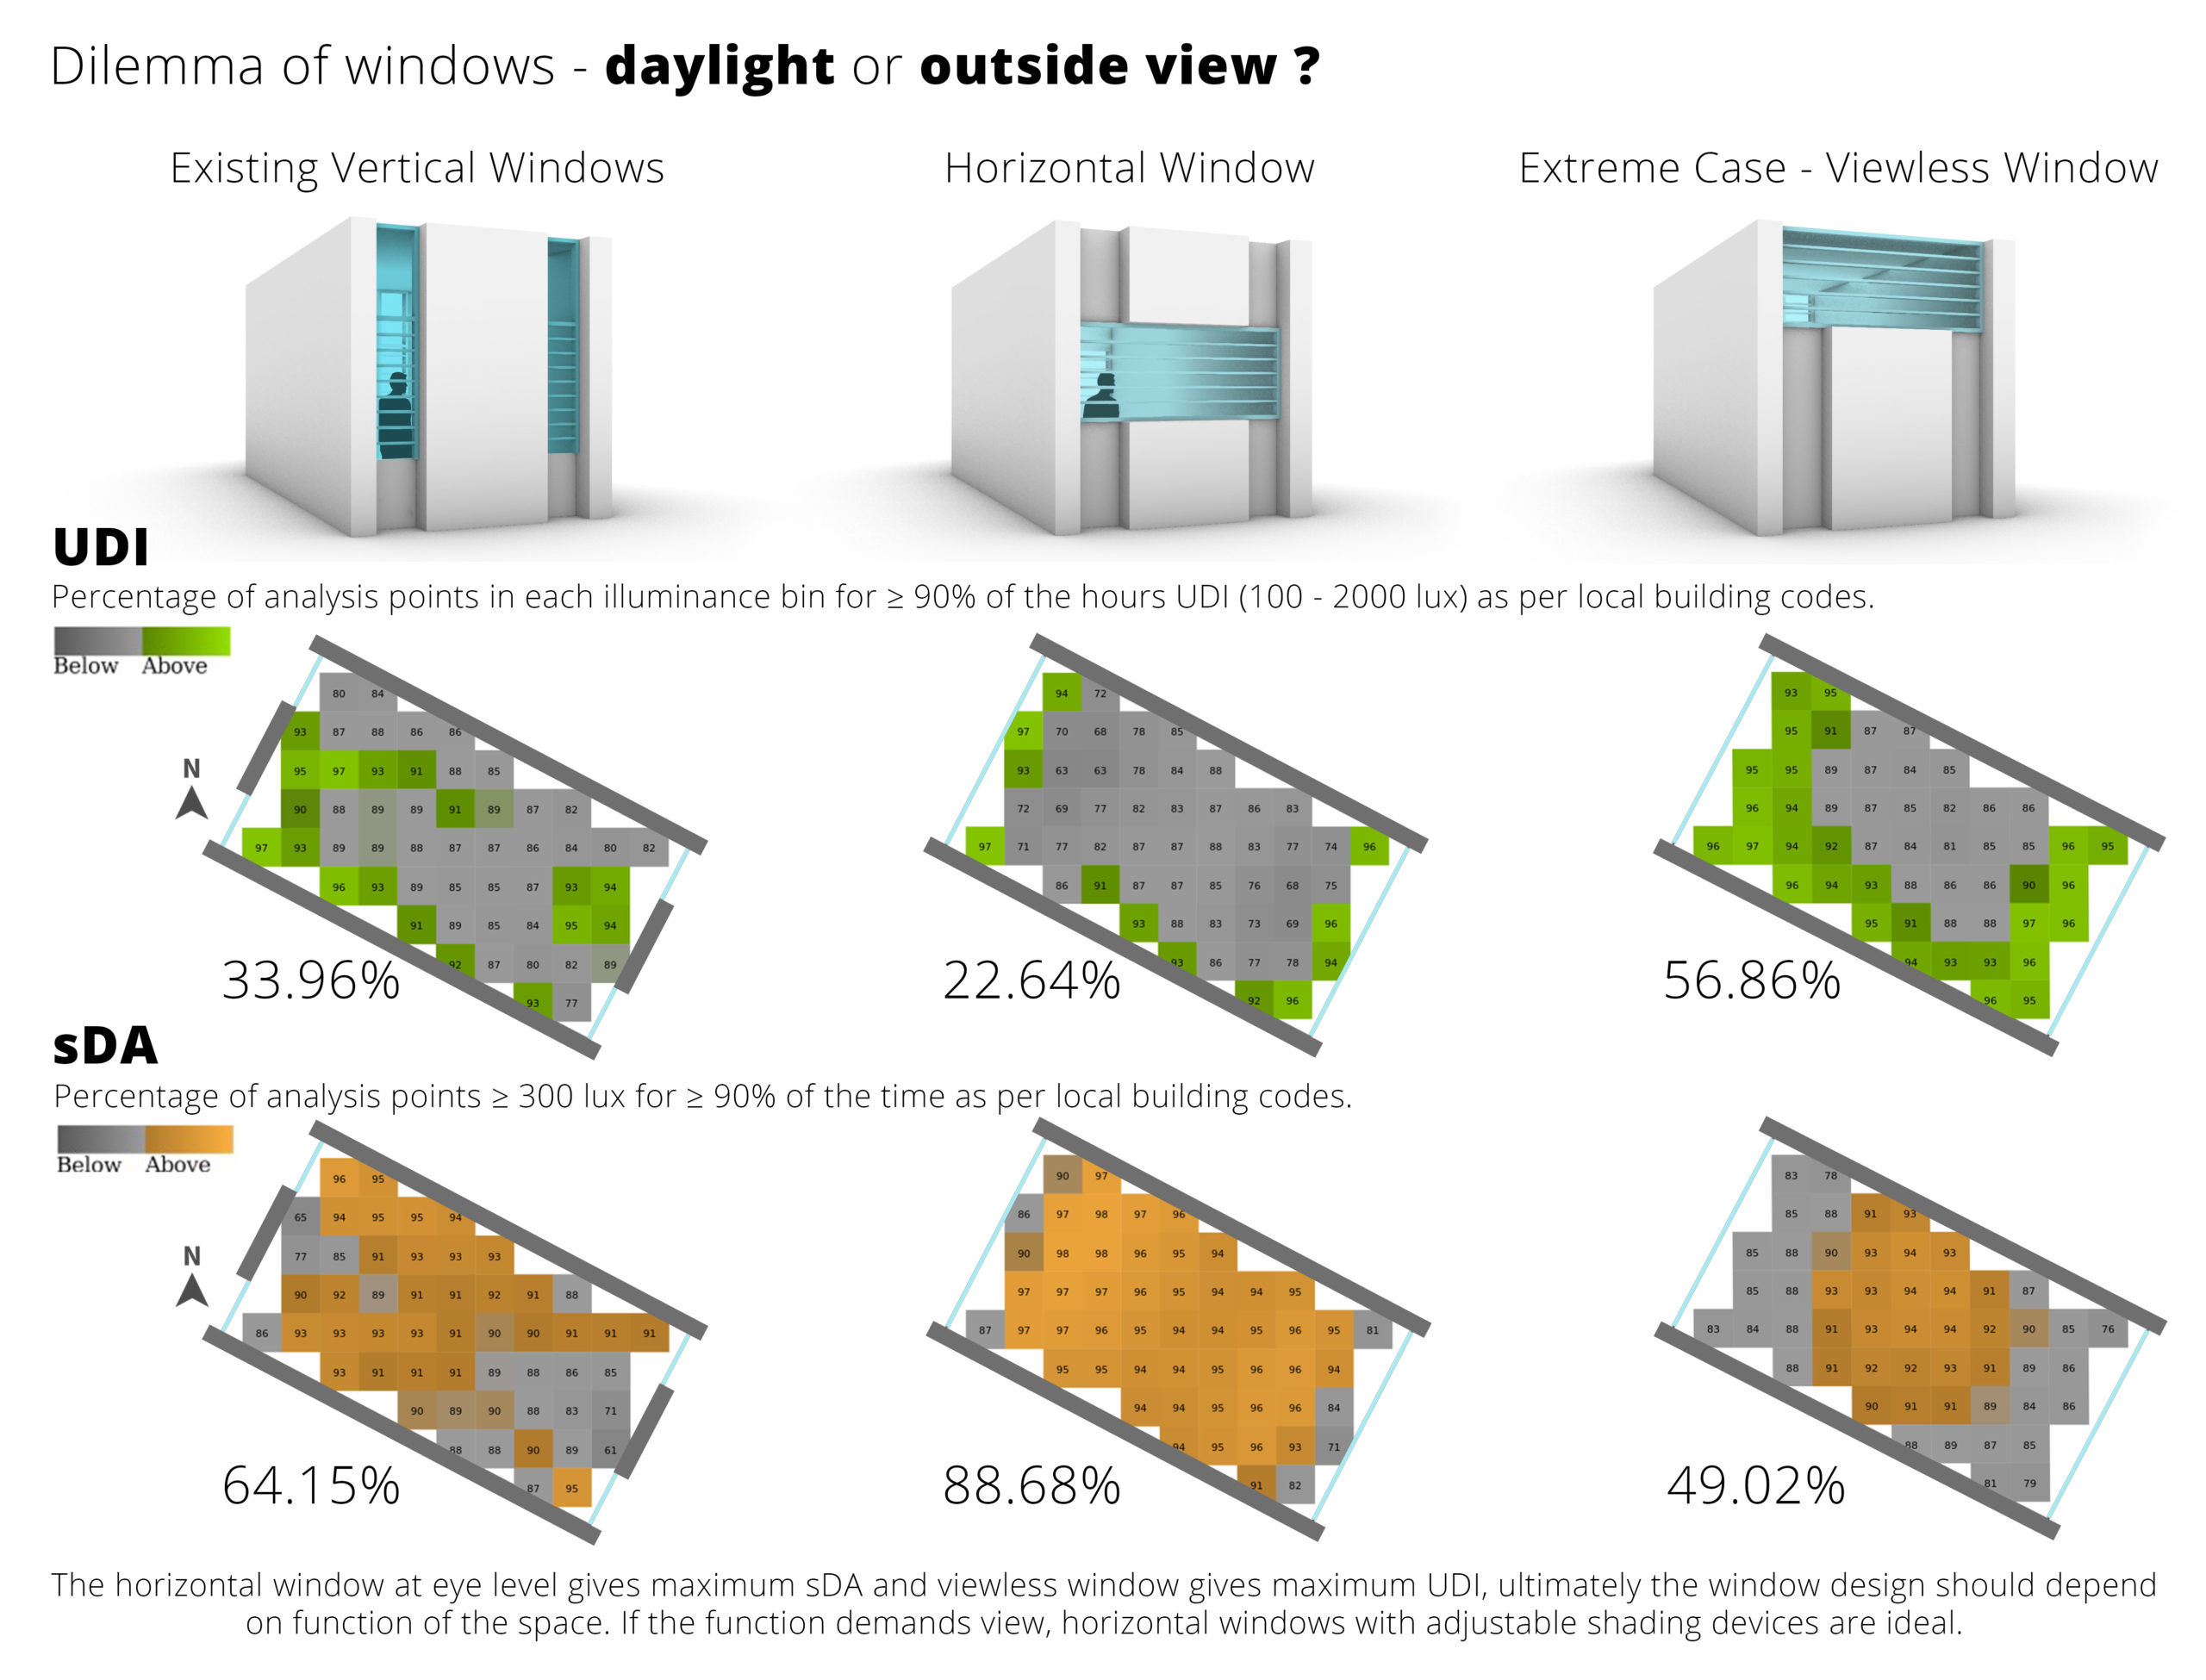 What is the impact of window designs with same WWR on daylight and outside view?